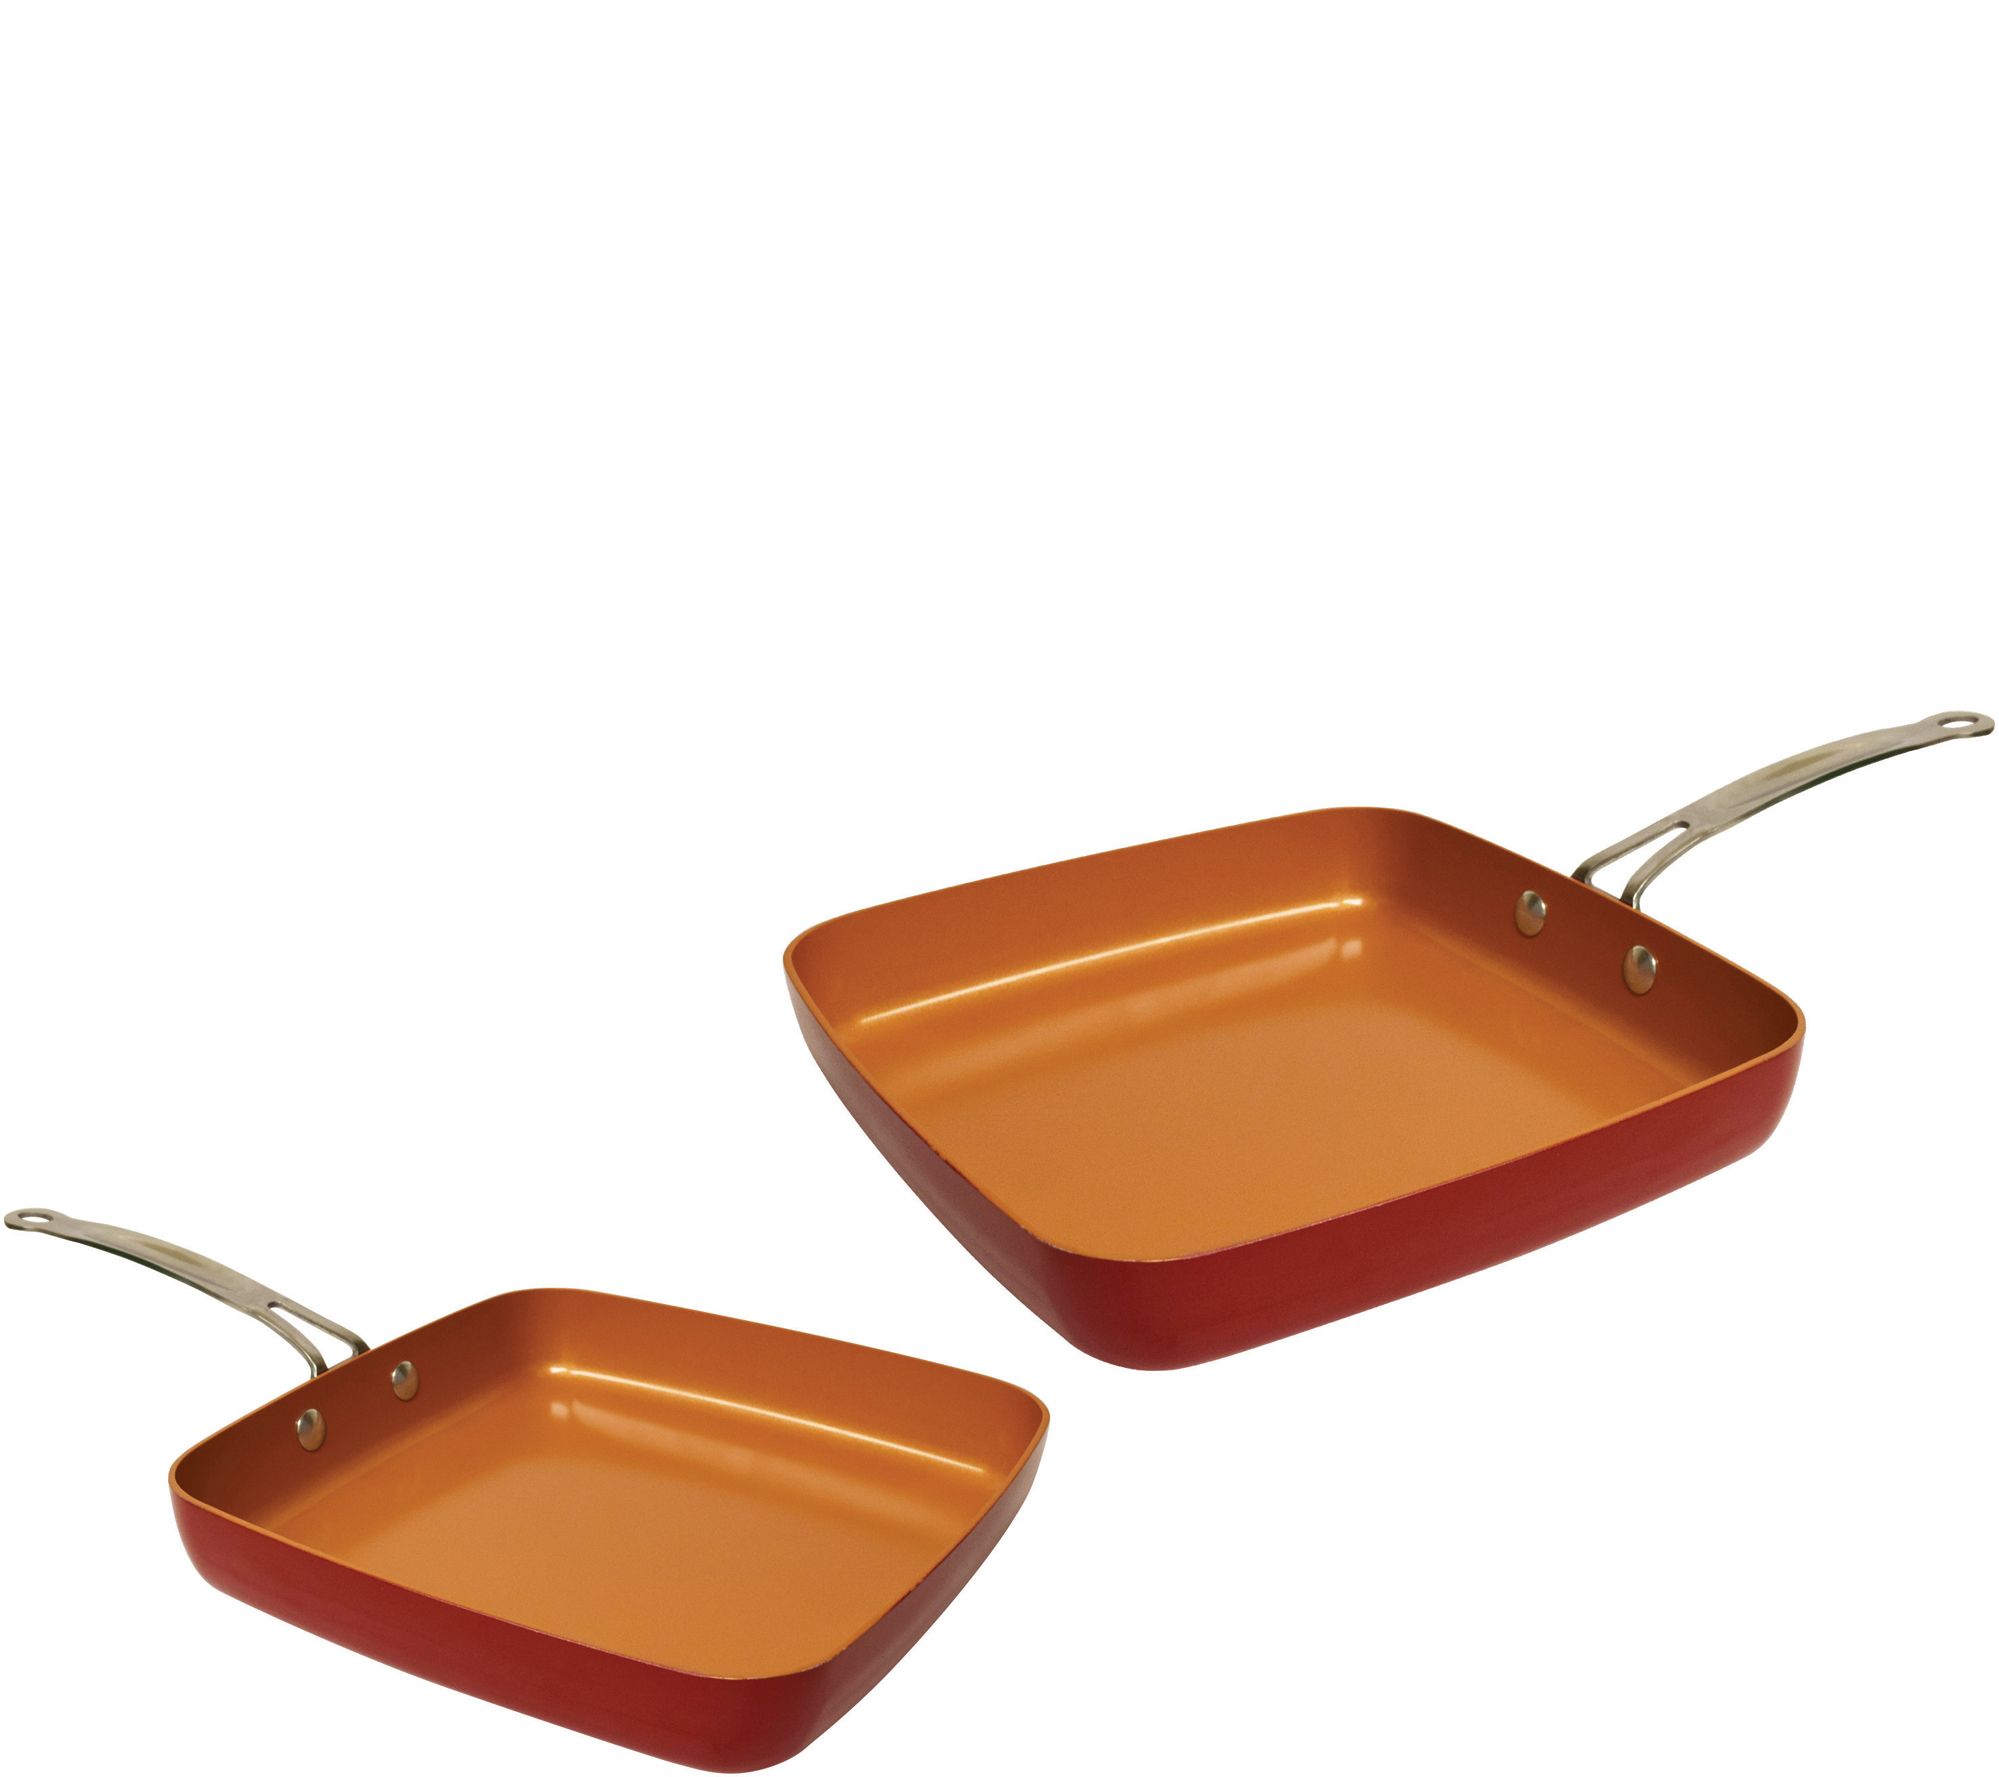 Red Copper Square Pan